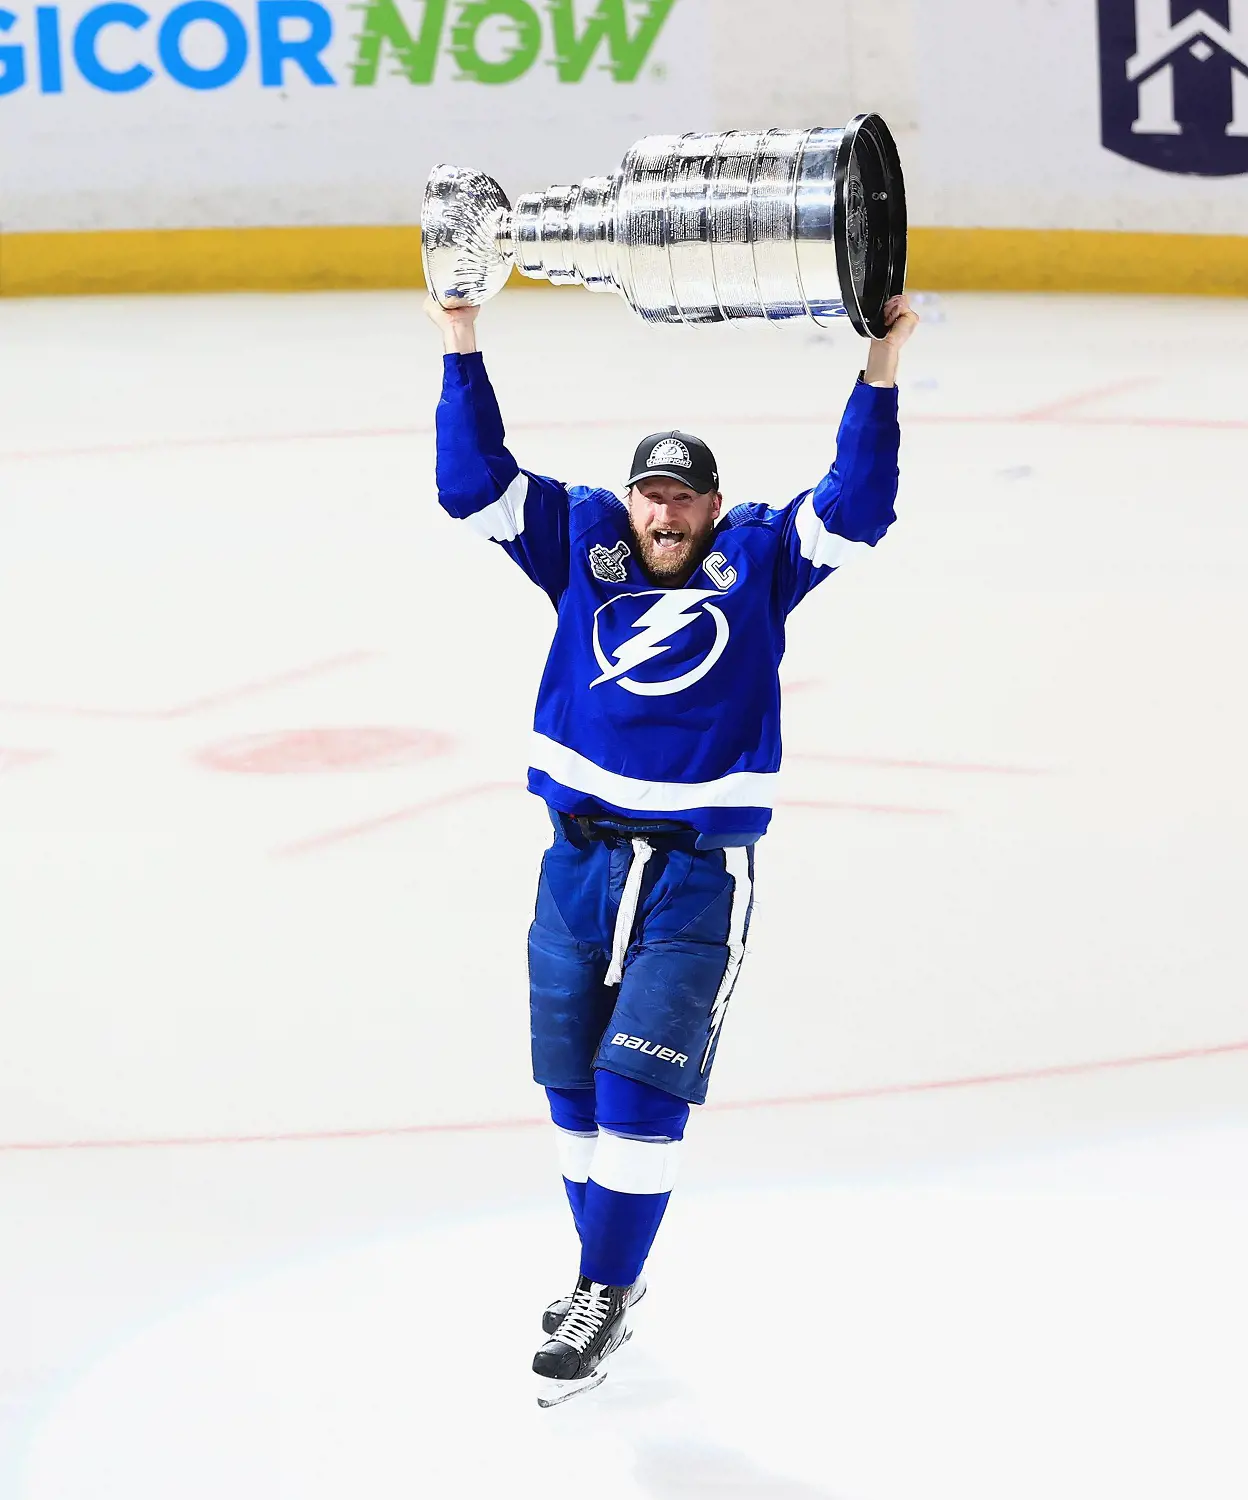 Steven lifting the Stanley Cup winning for the the defending champion Lightning over the Canadiens in 2021